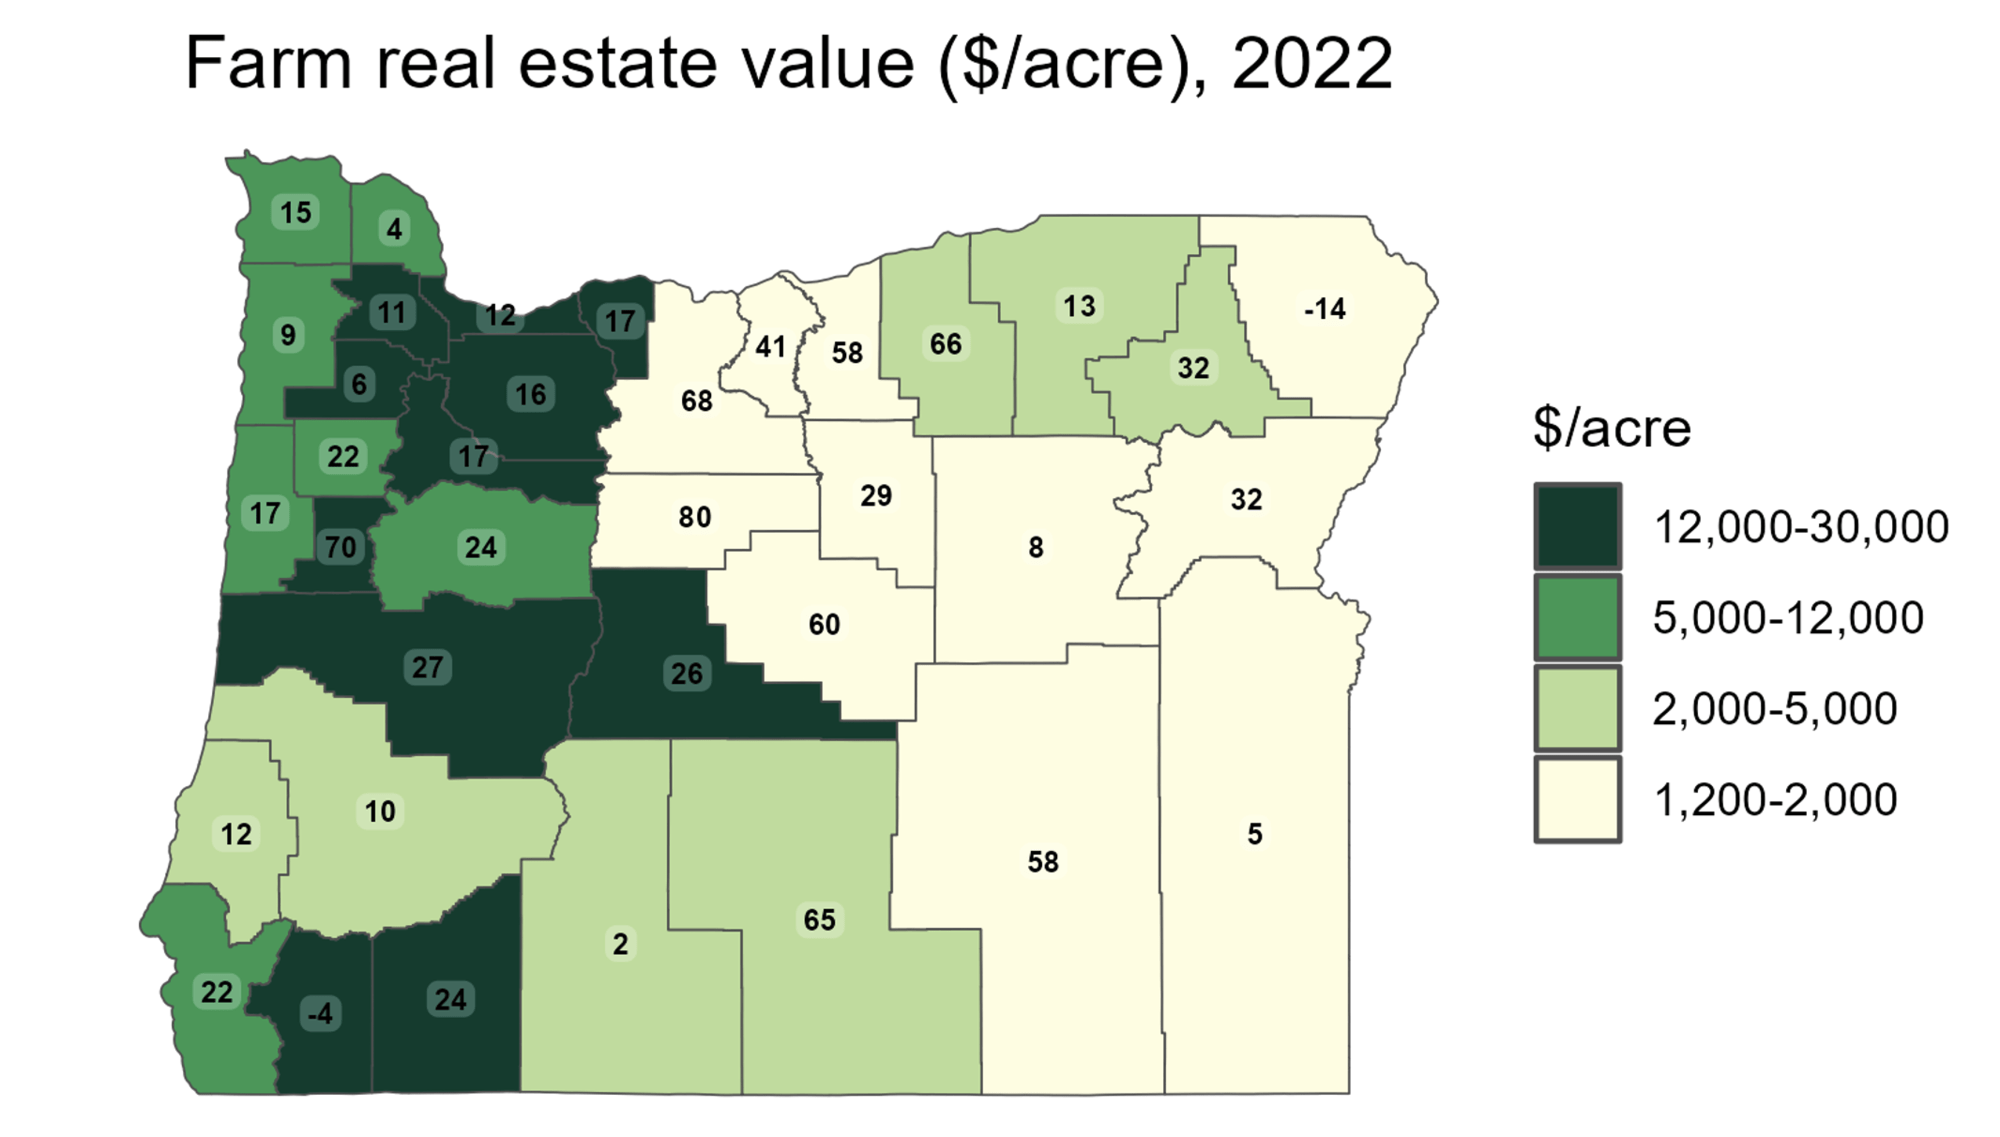 Farm real estate value ($/acre) in 2022 by Oregon county